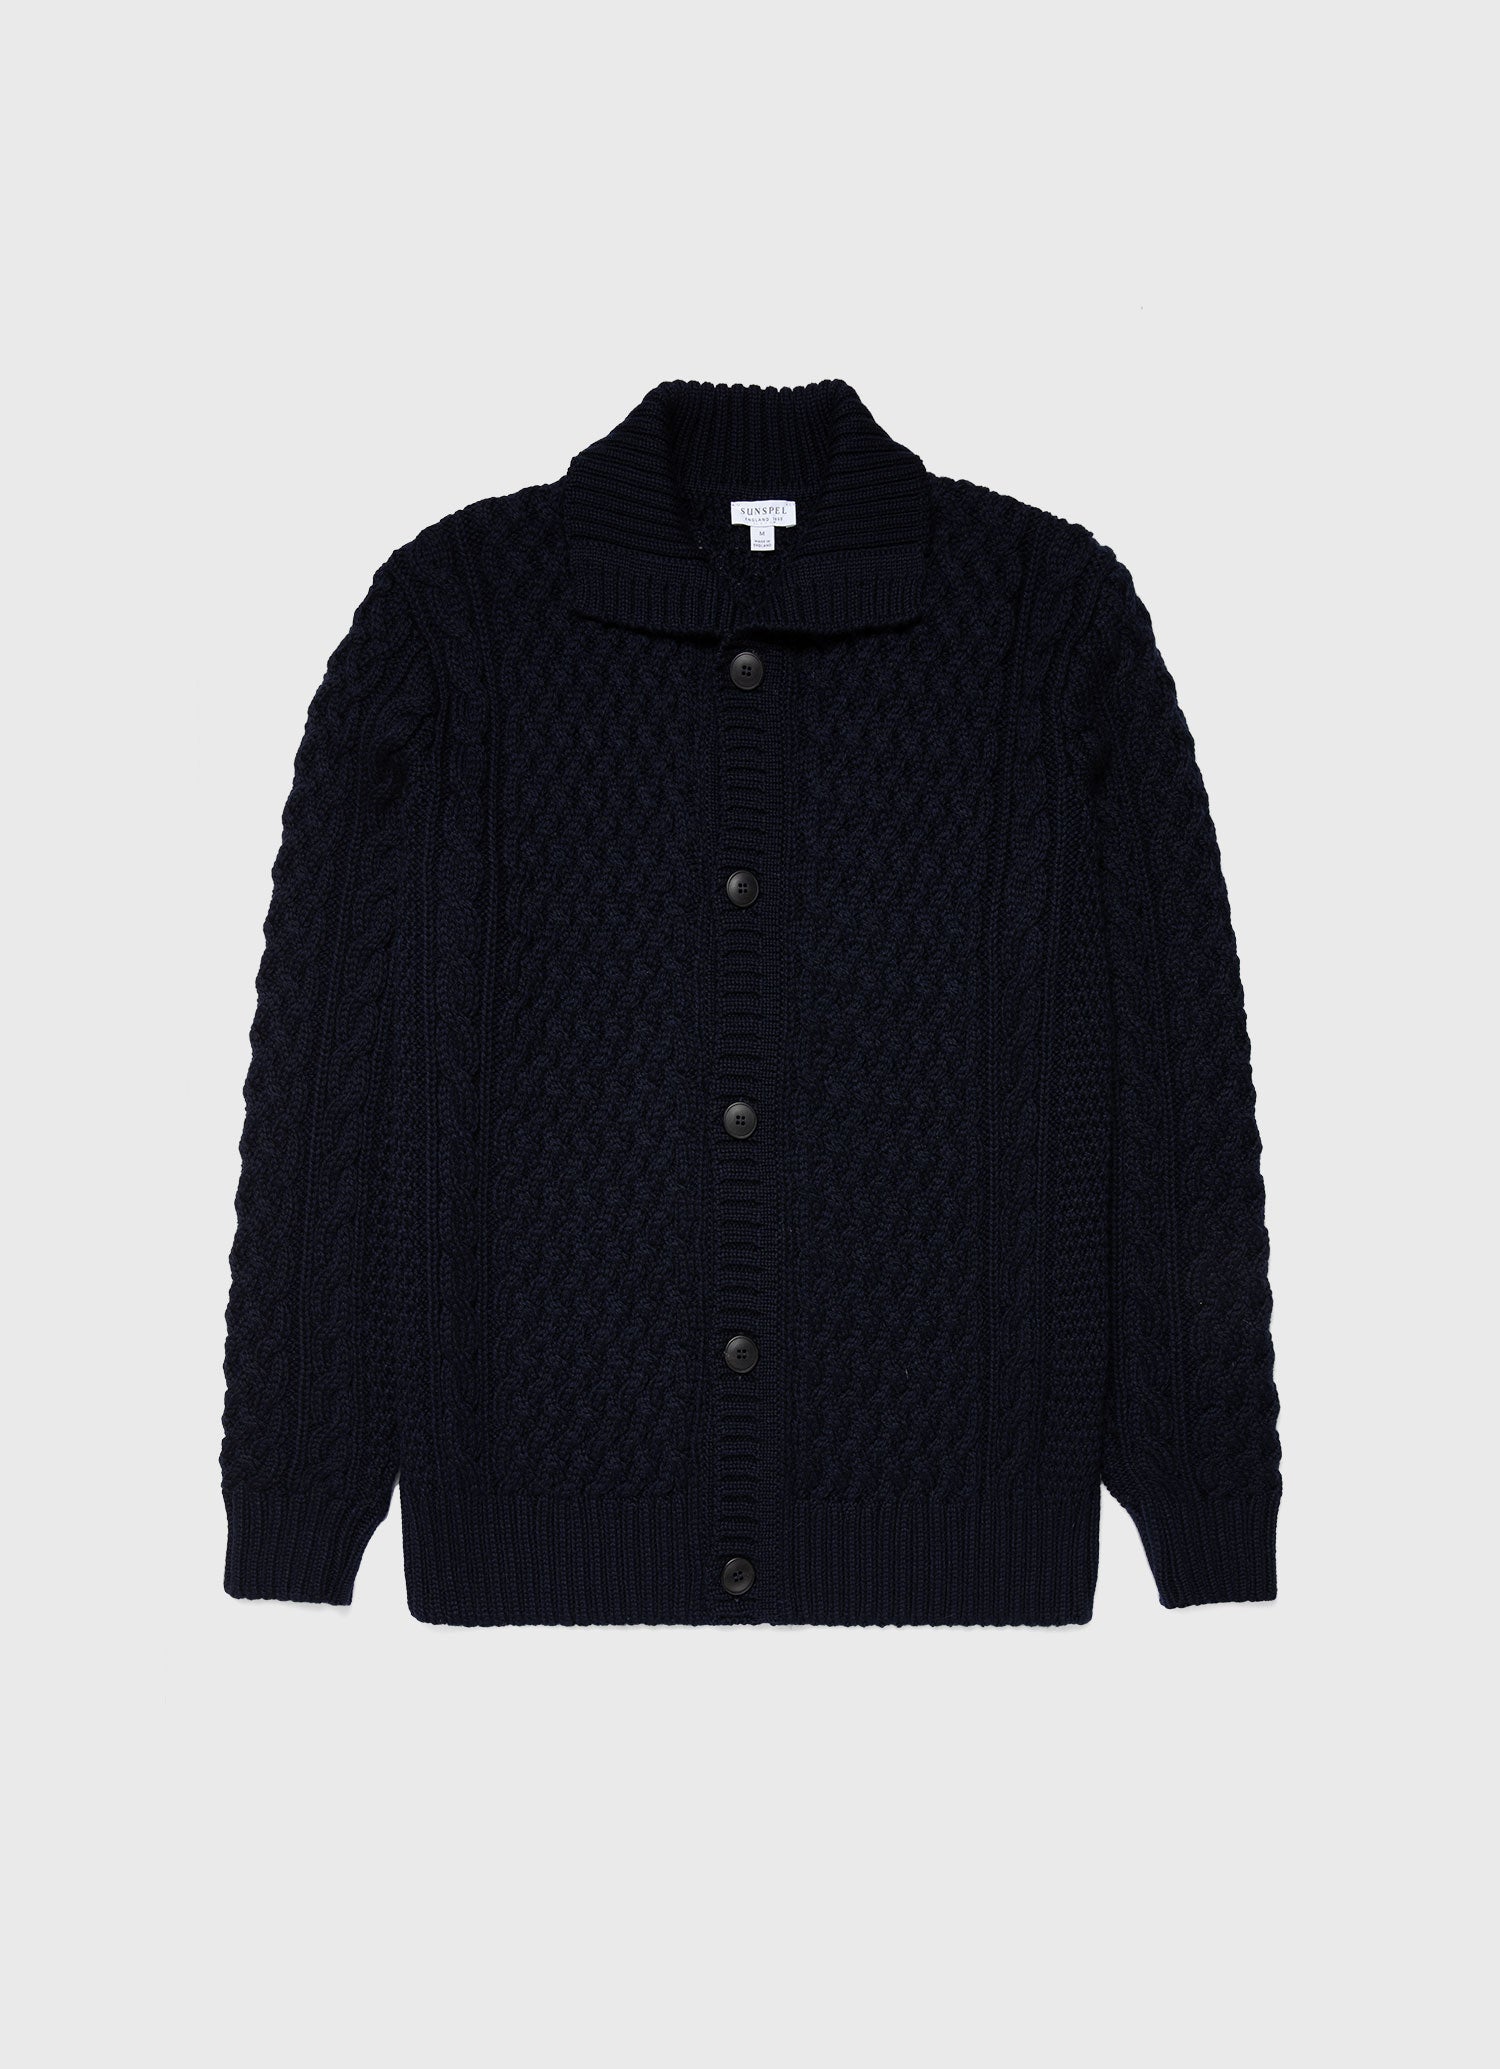 Men's Cable Knit Cardigan Jacket in Navy